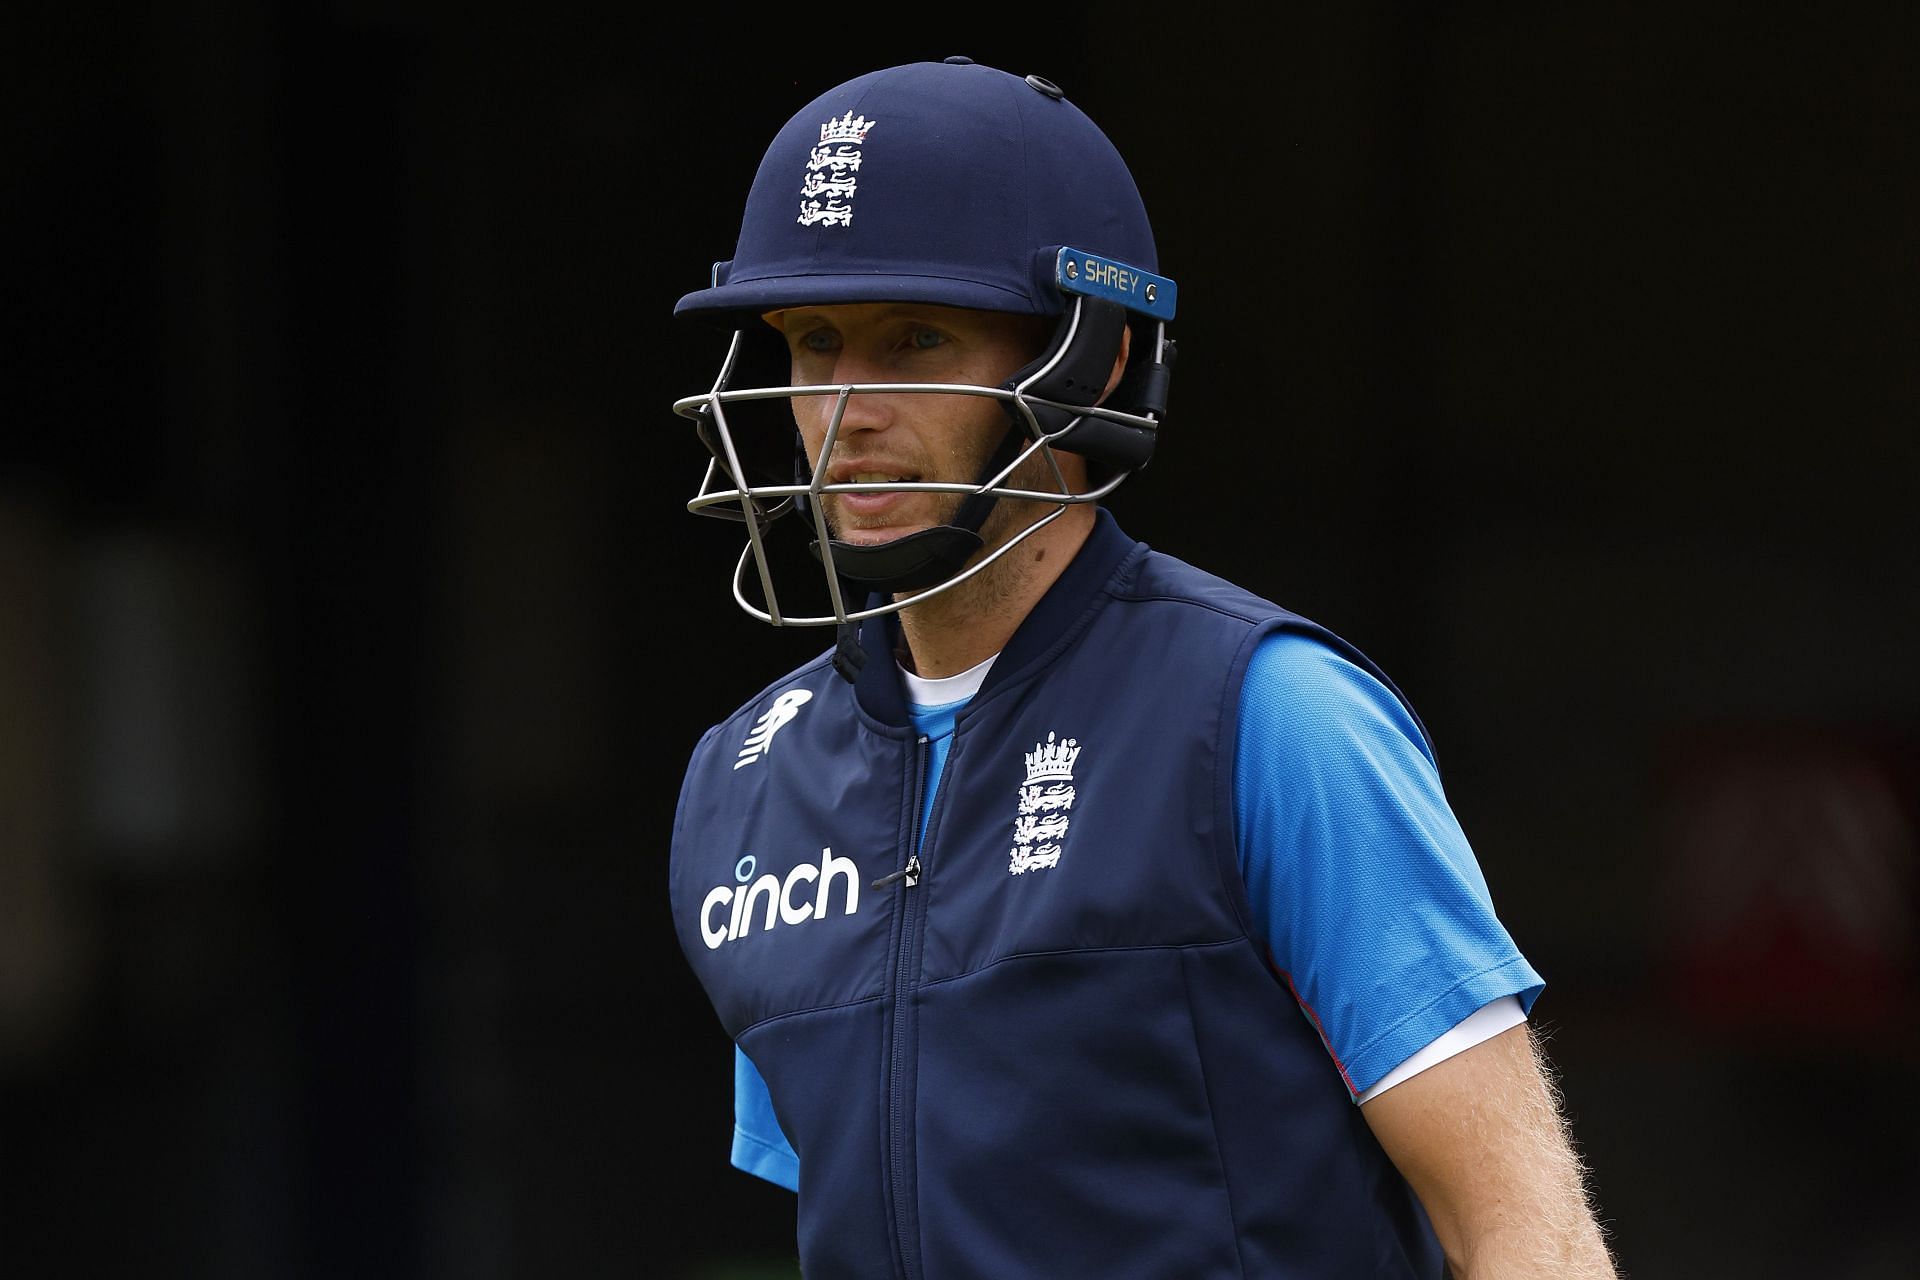 Joe Root needs to pull his troops together to avoid a third Ashes whitewash in recent times.